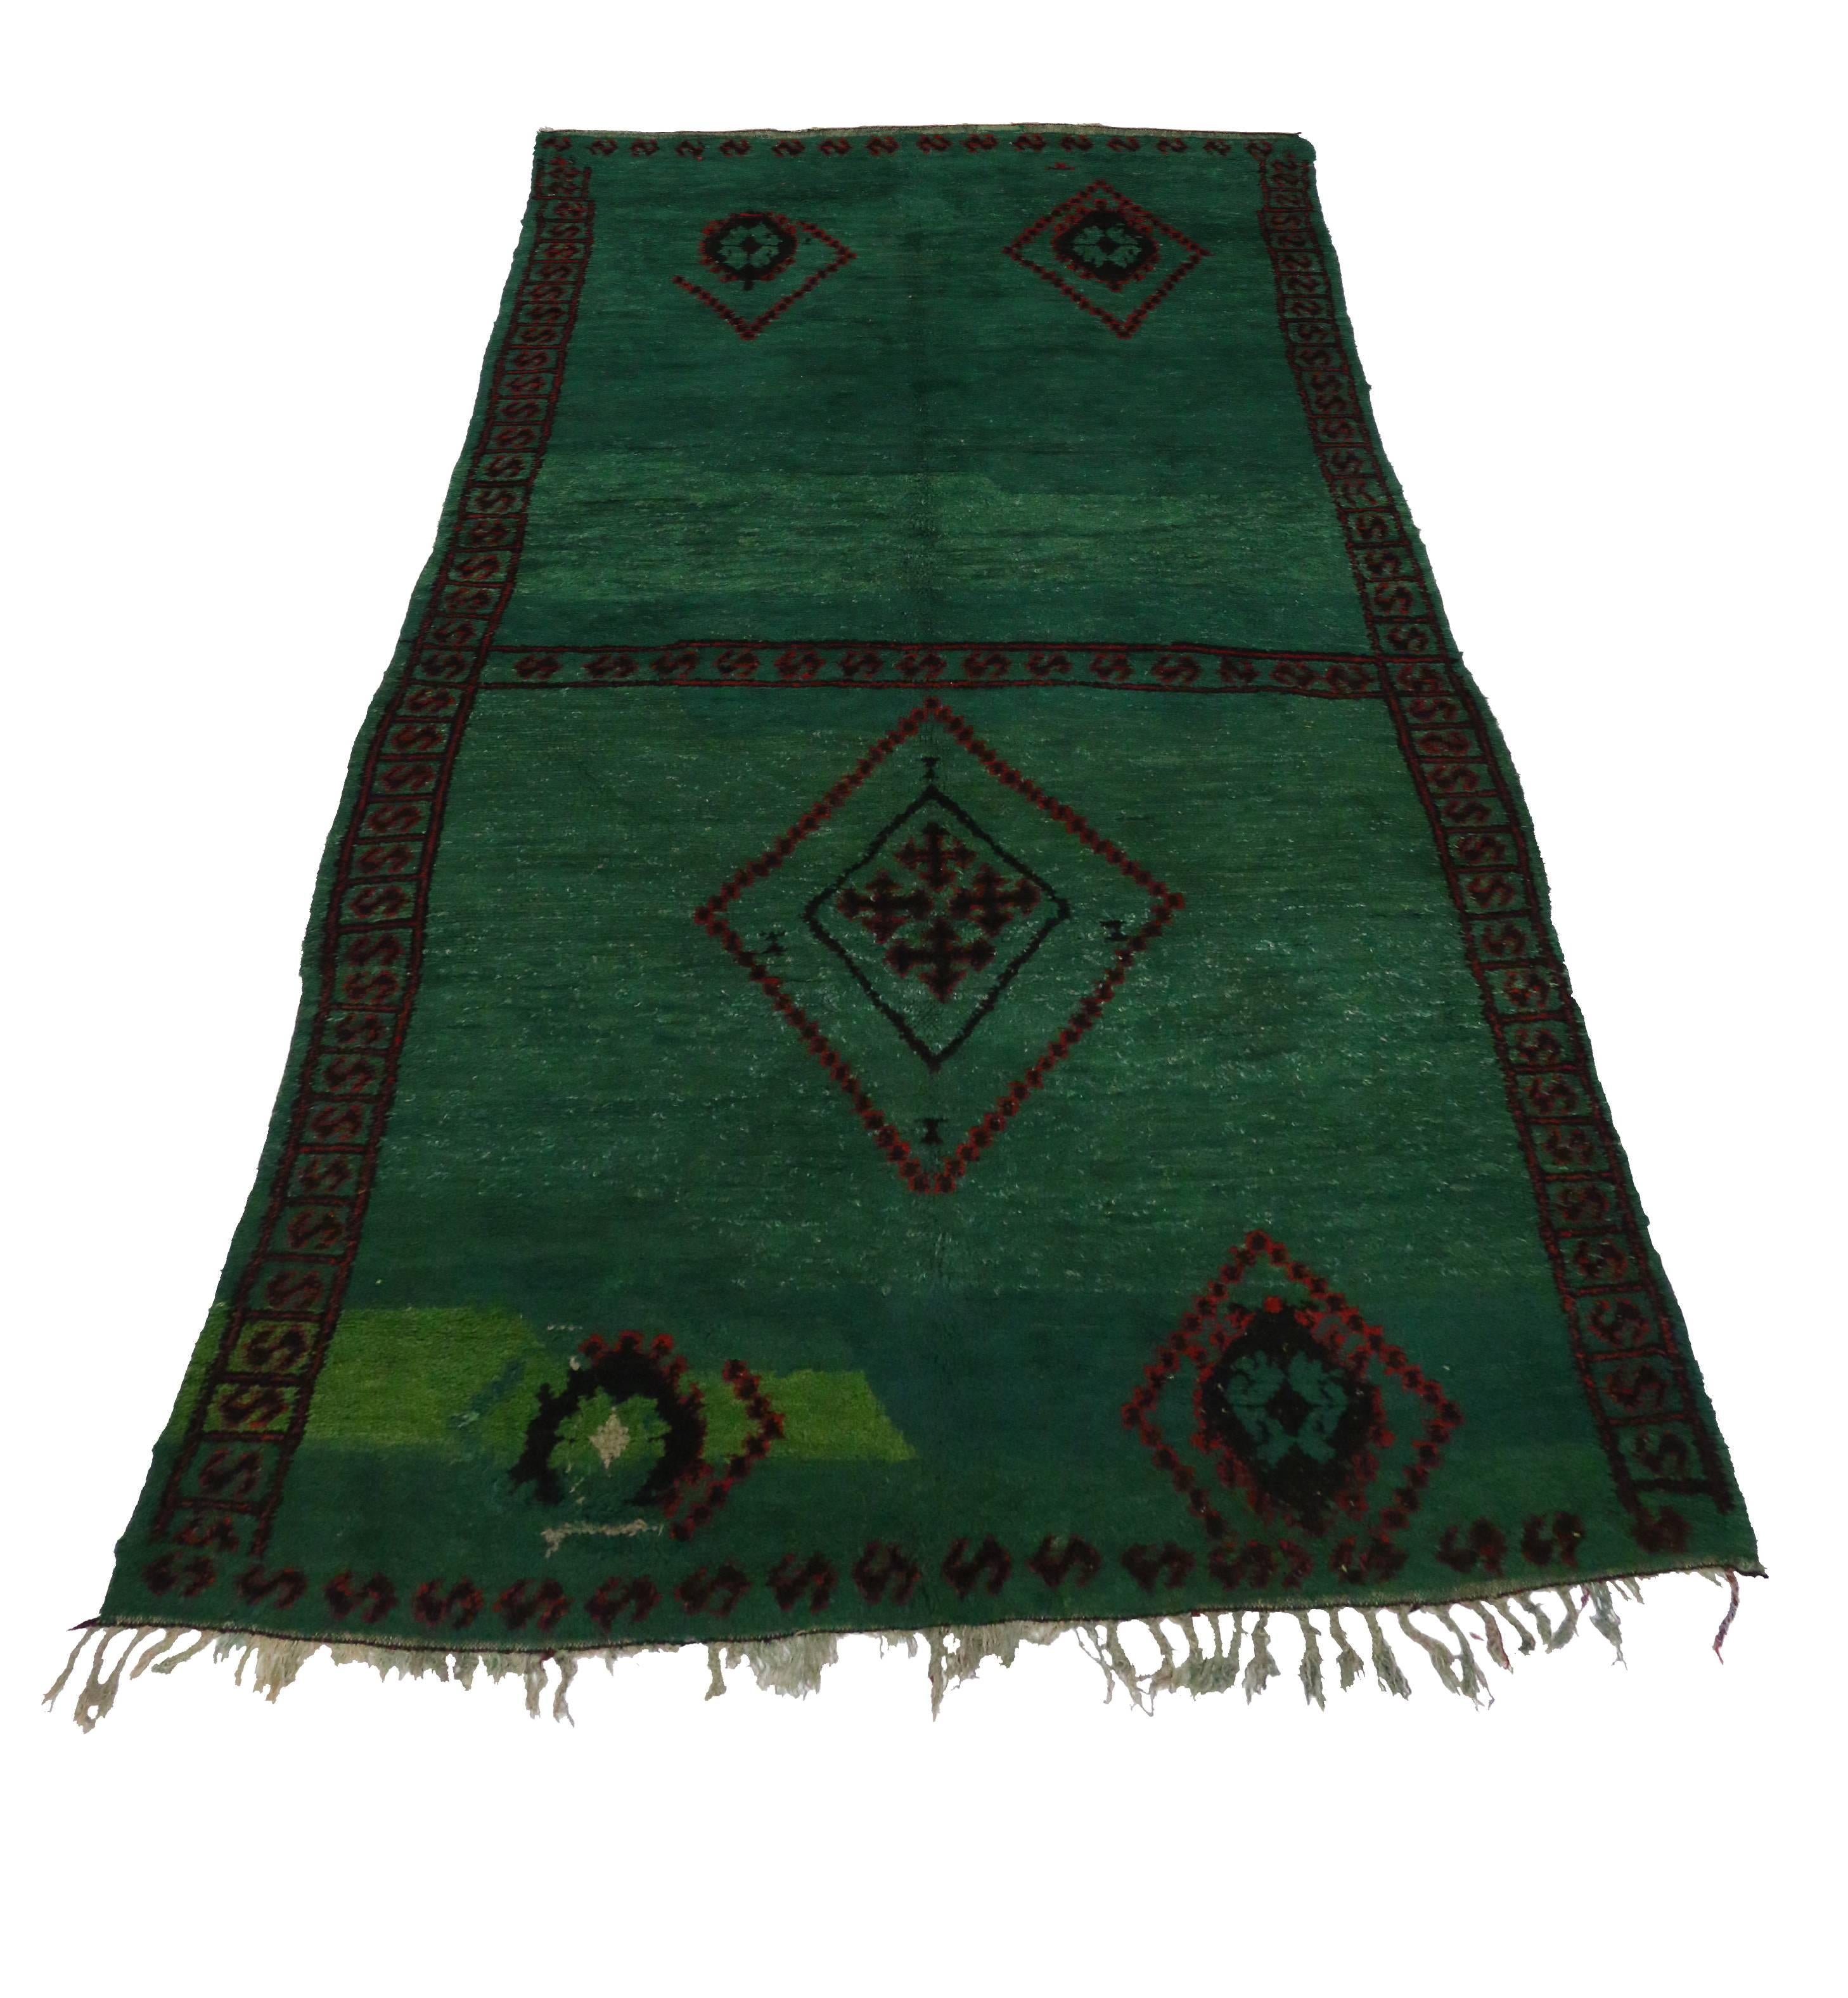 20th Century Green Beni M'guild Moroccan Rug in Malachite Color with Tribal Style